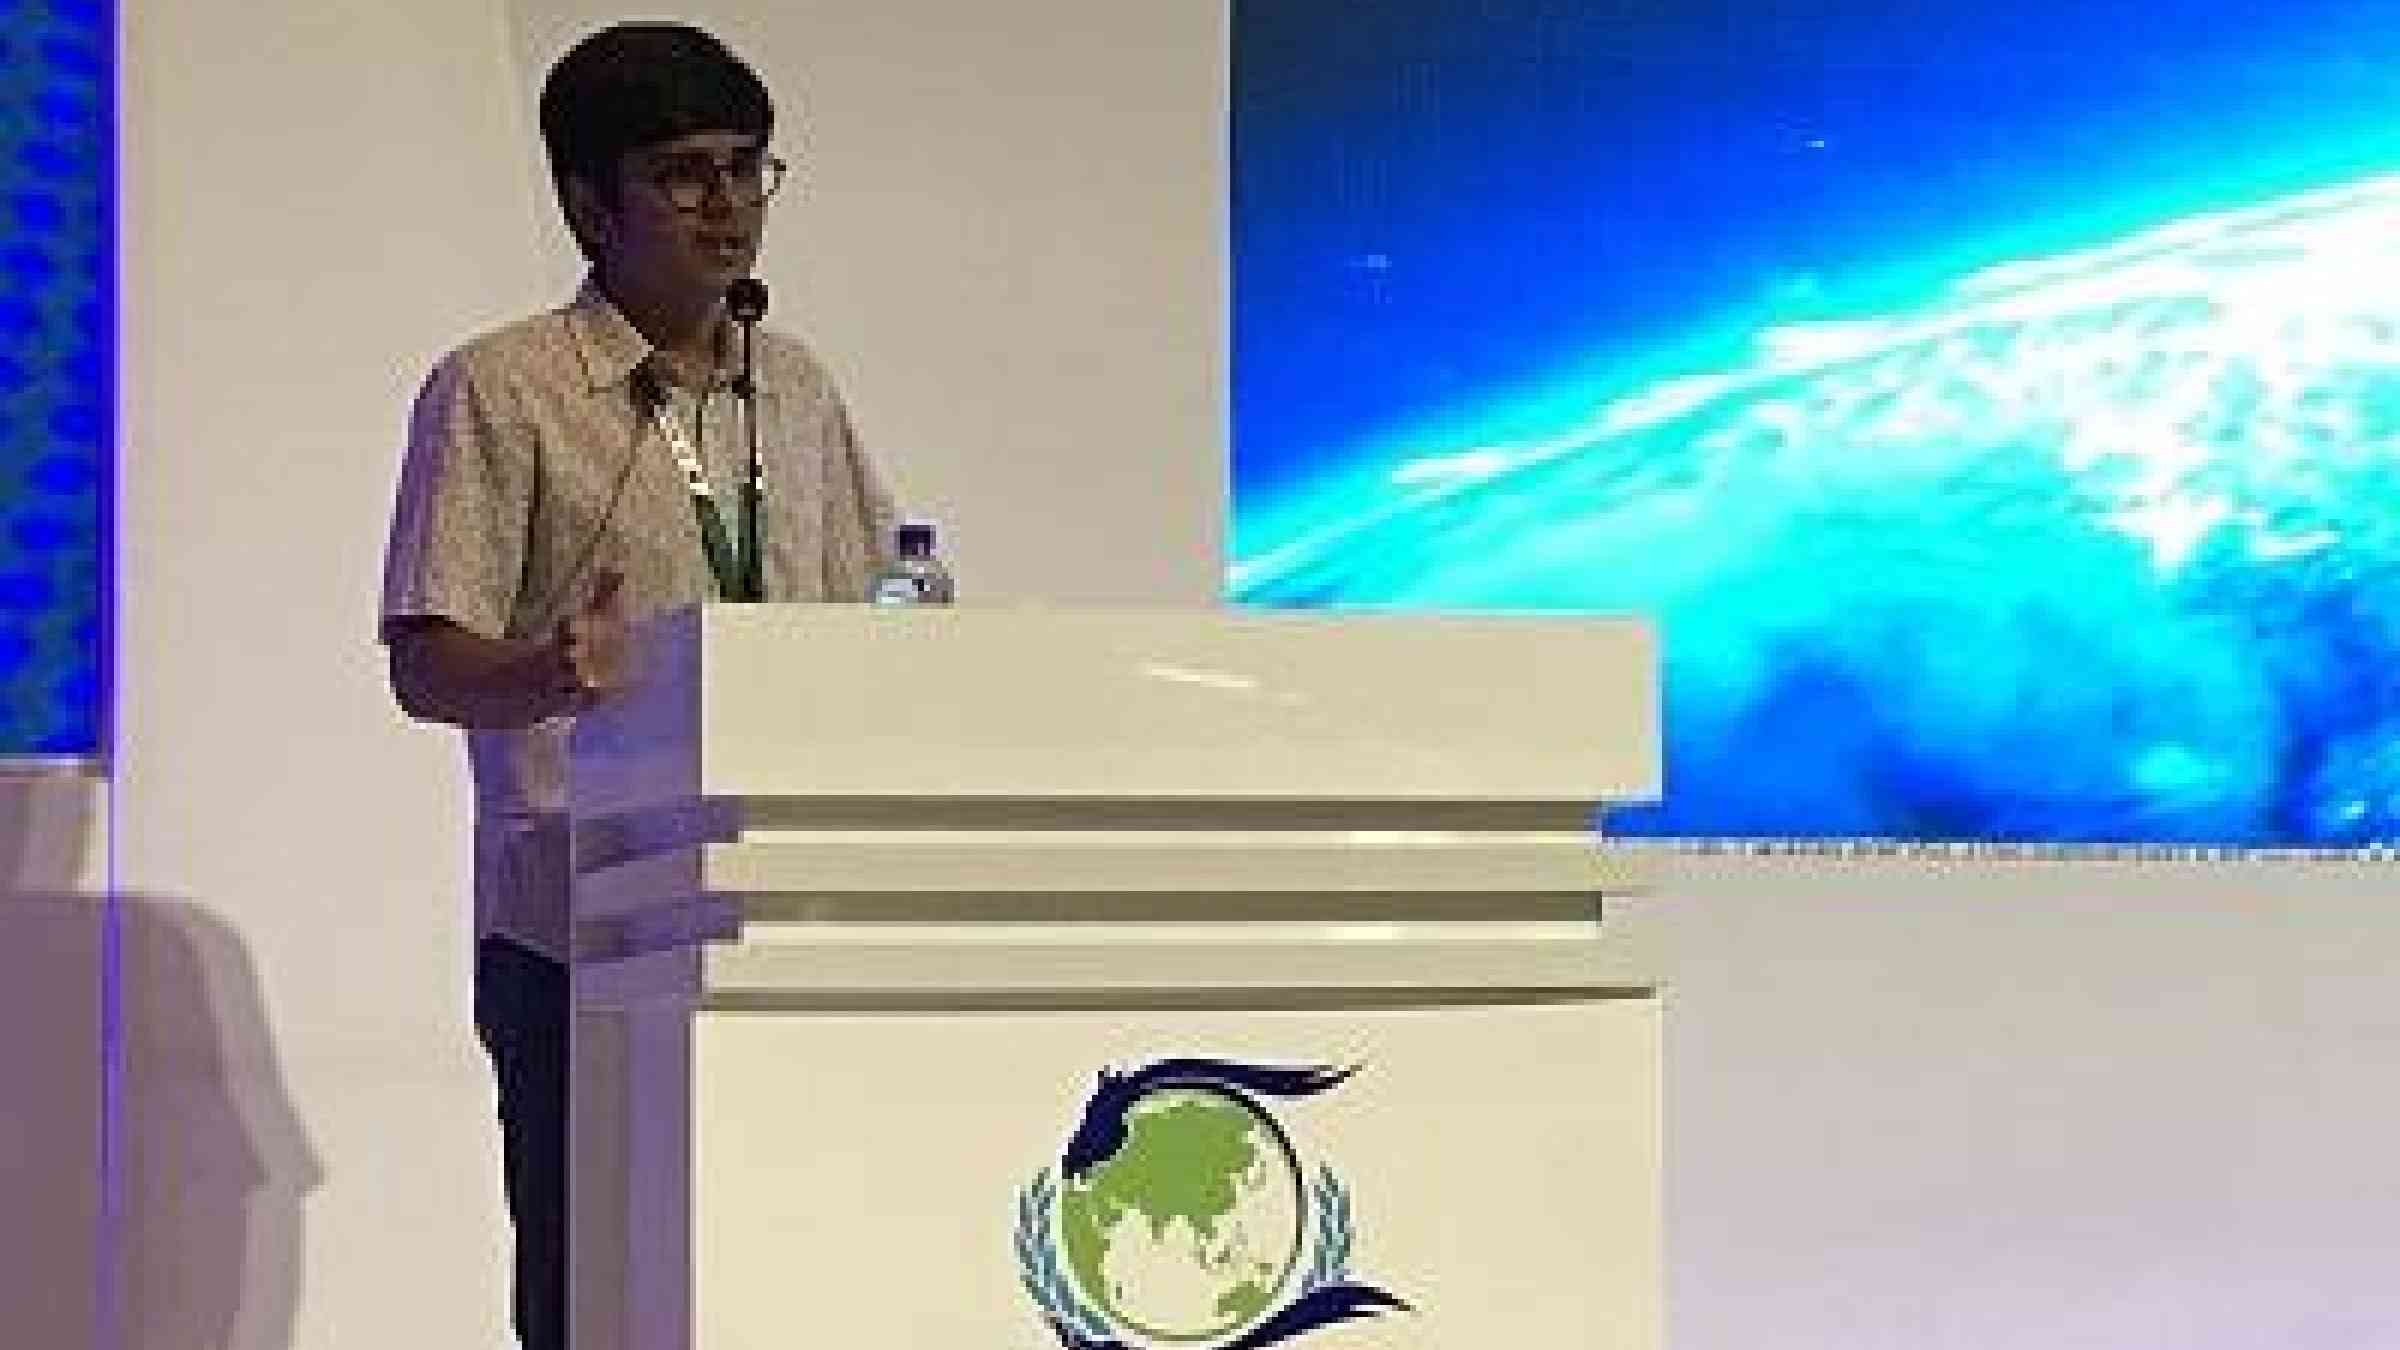 17-year-old Rameshwar Mihir Bhatt from India makes his acceptance speech at the AMCDRR2018 closing ceremony